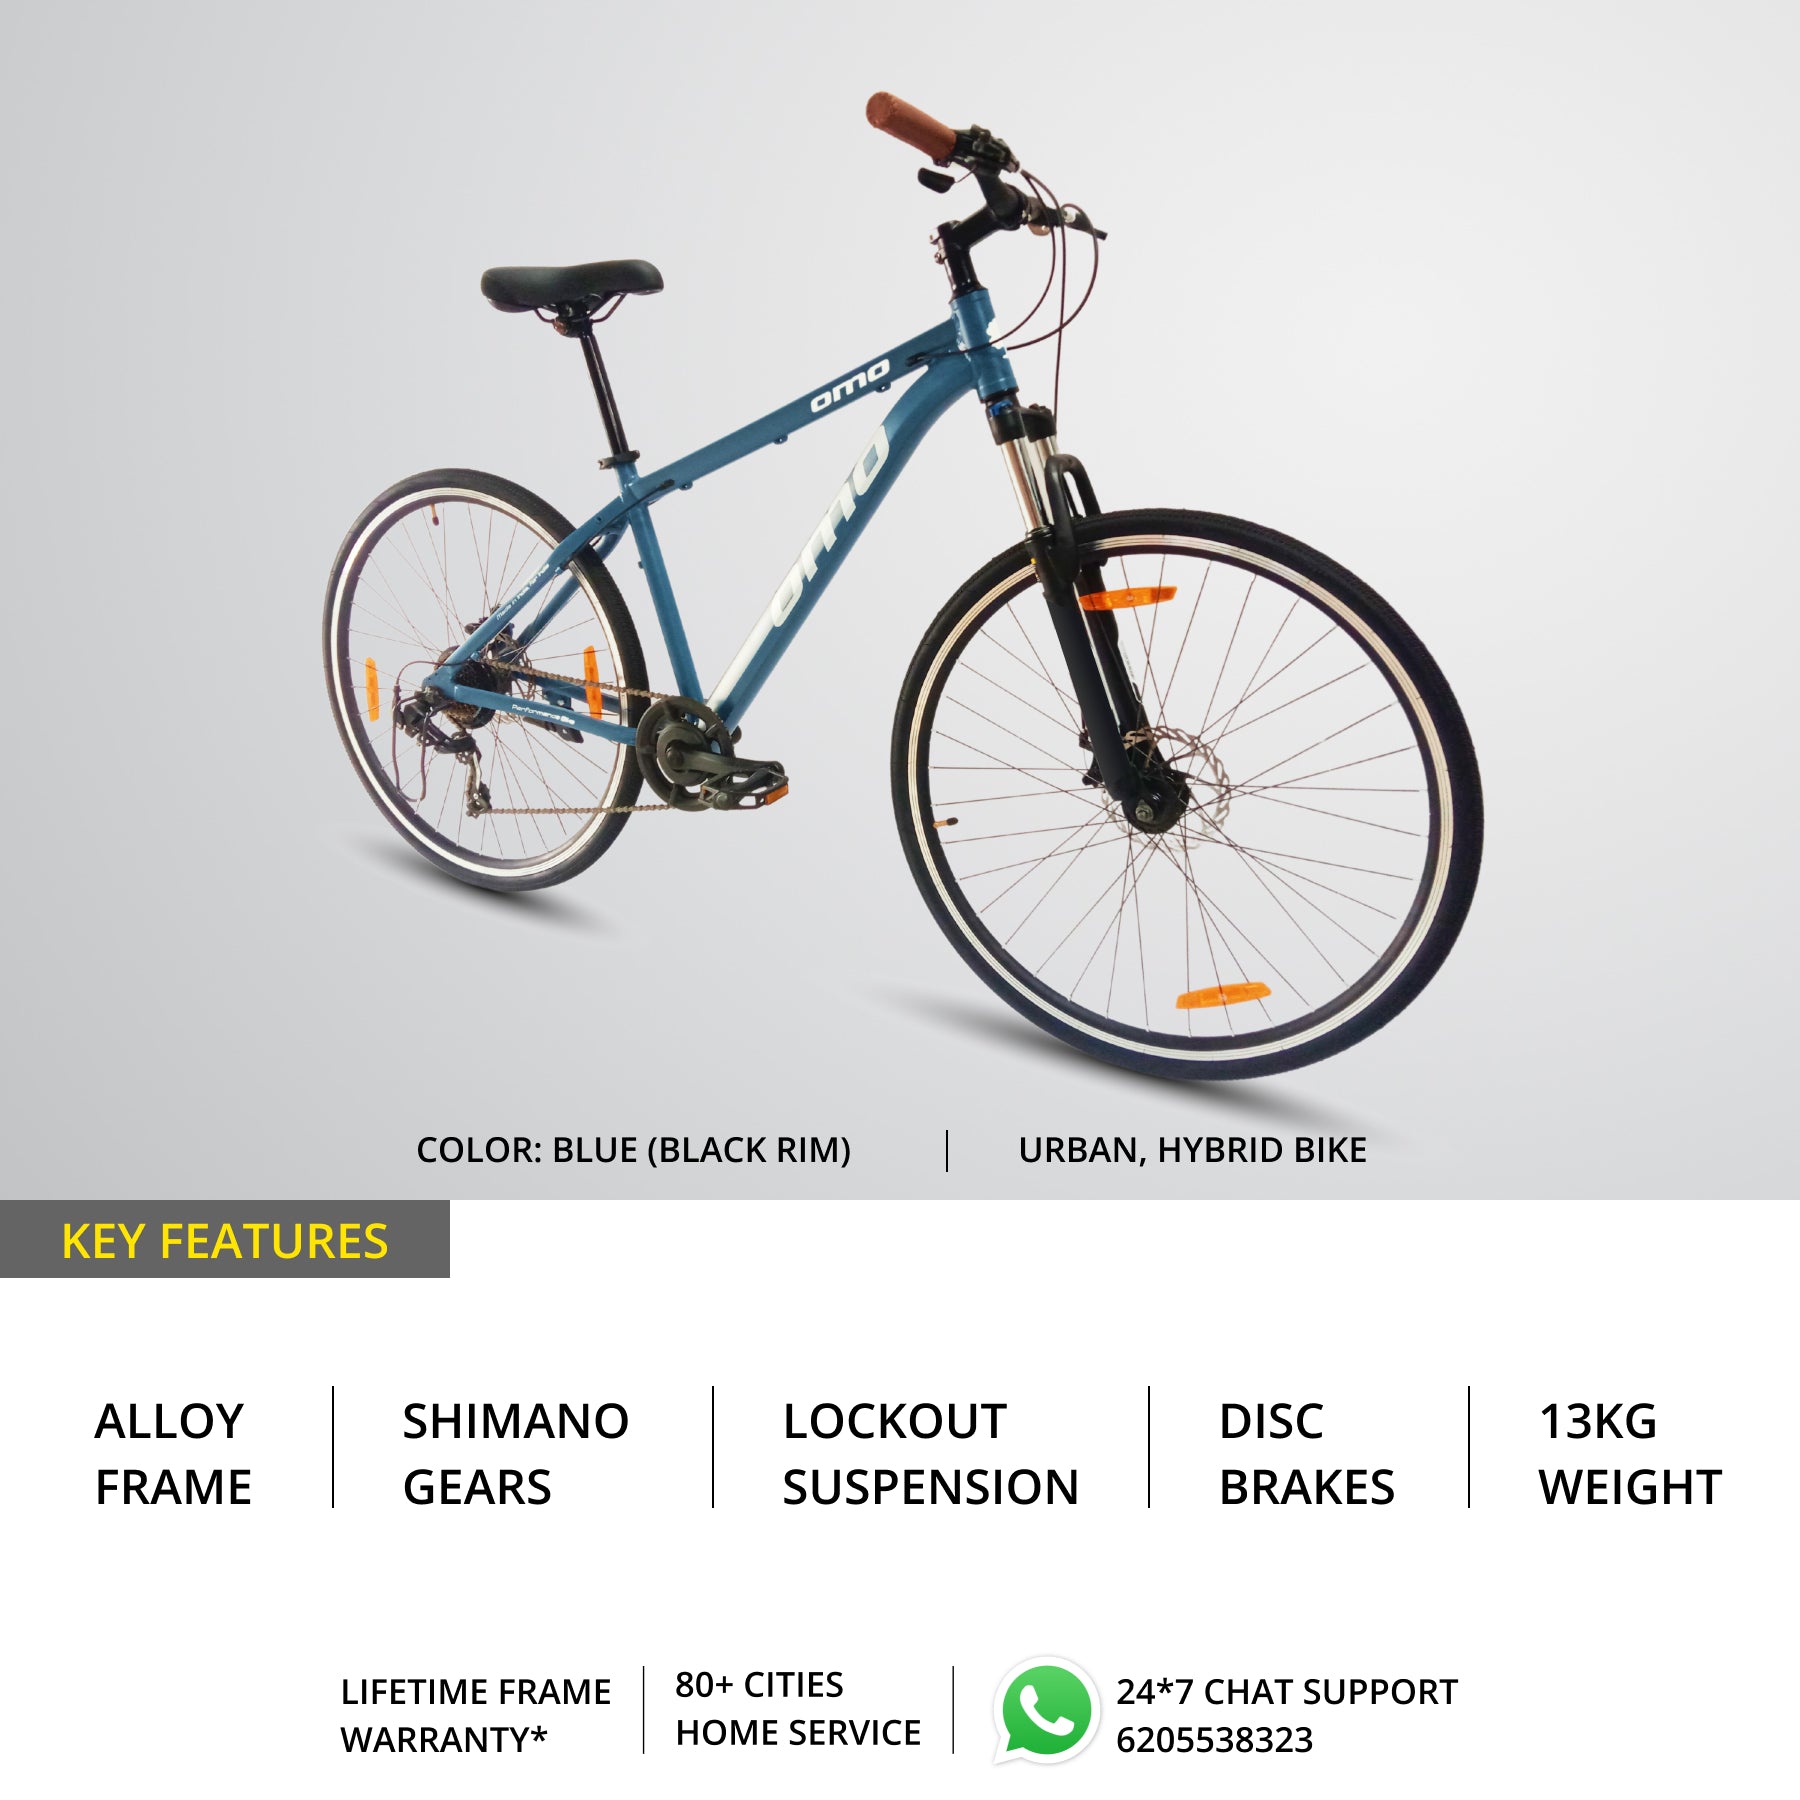 OMO bikes alloy hybrid key features shimano gear lightweight hybrid bike with suspension disc brakes in blue color 